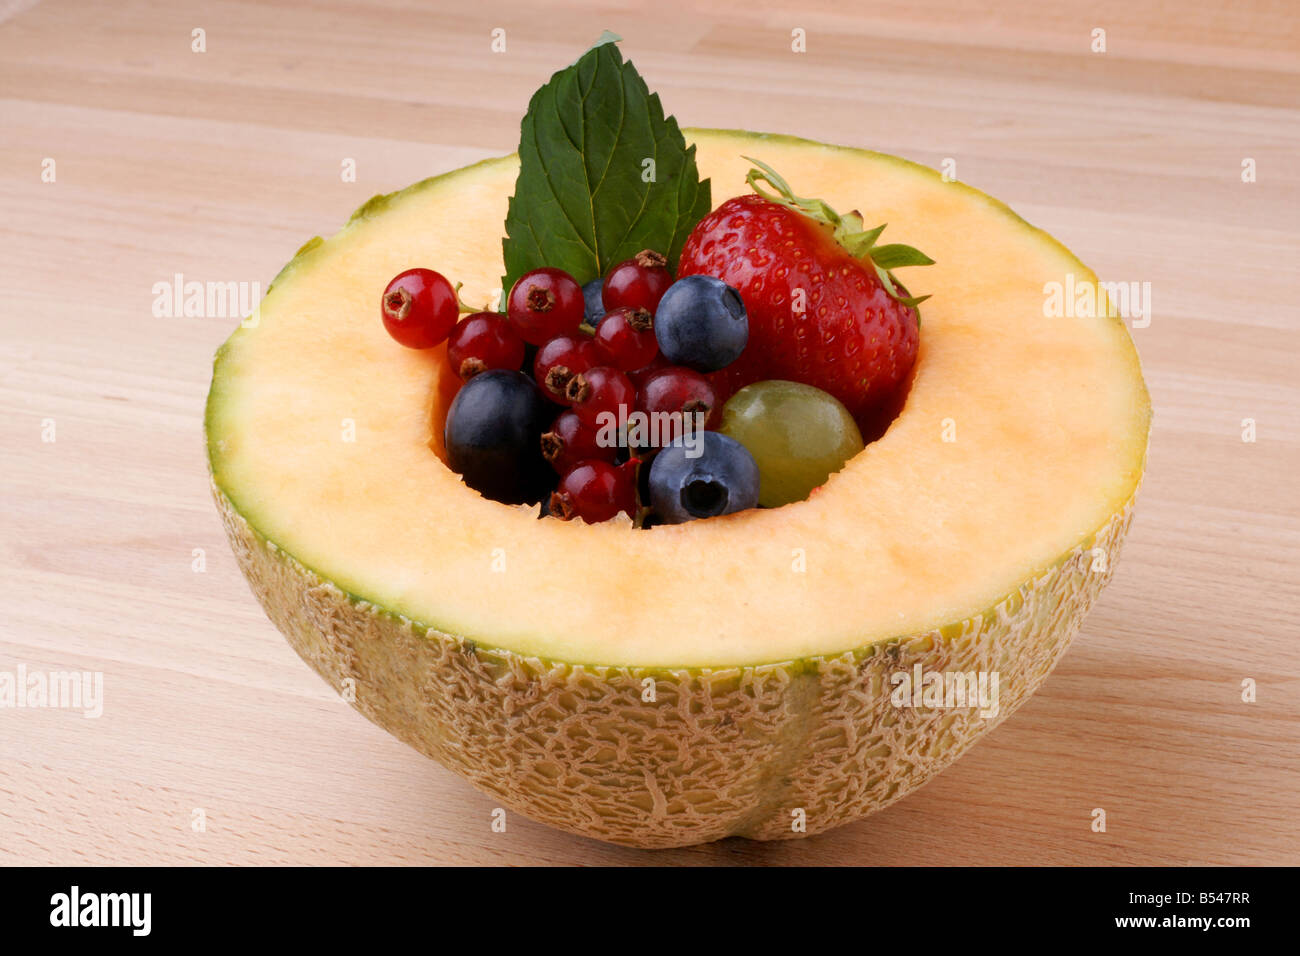 Fruits on wooden background Stock Photo